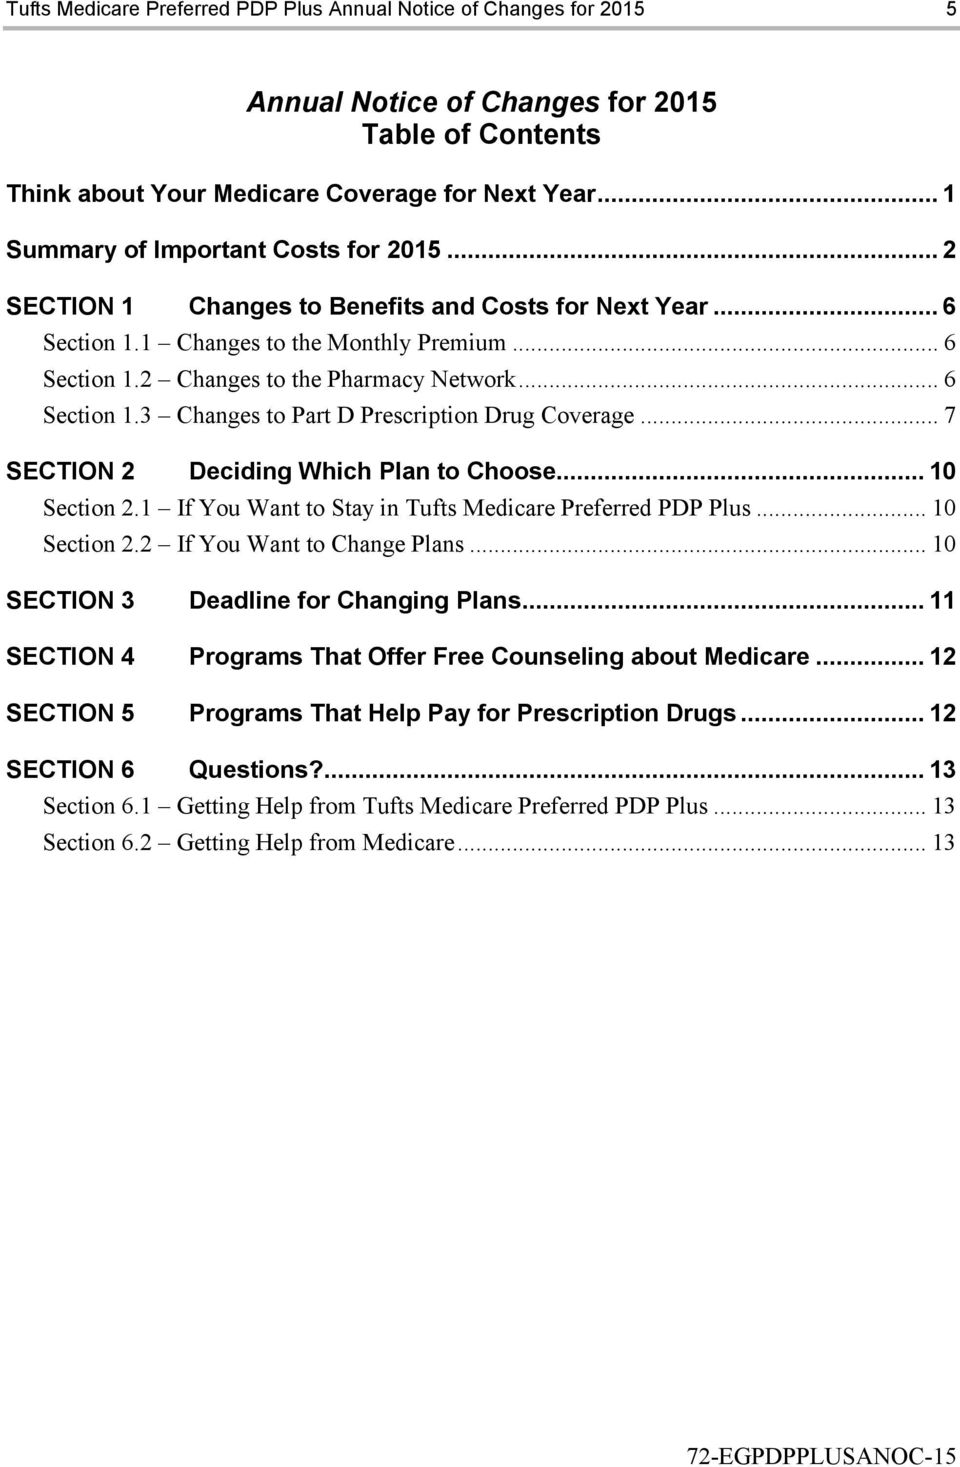 .. 6 Section 1.3 Changes to Part D Prescription Drug Coverage... 7 SECTION 2 Deciding Which Plan to Choose... 10 Section 2.1 If You Want to Stay in Tufts Medicare Preferred PDP Plus... 10 Section 2.2 If You Want to Change Plans.